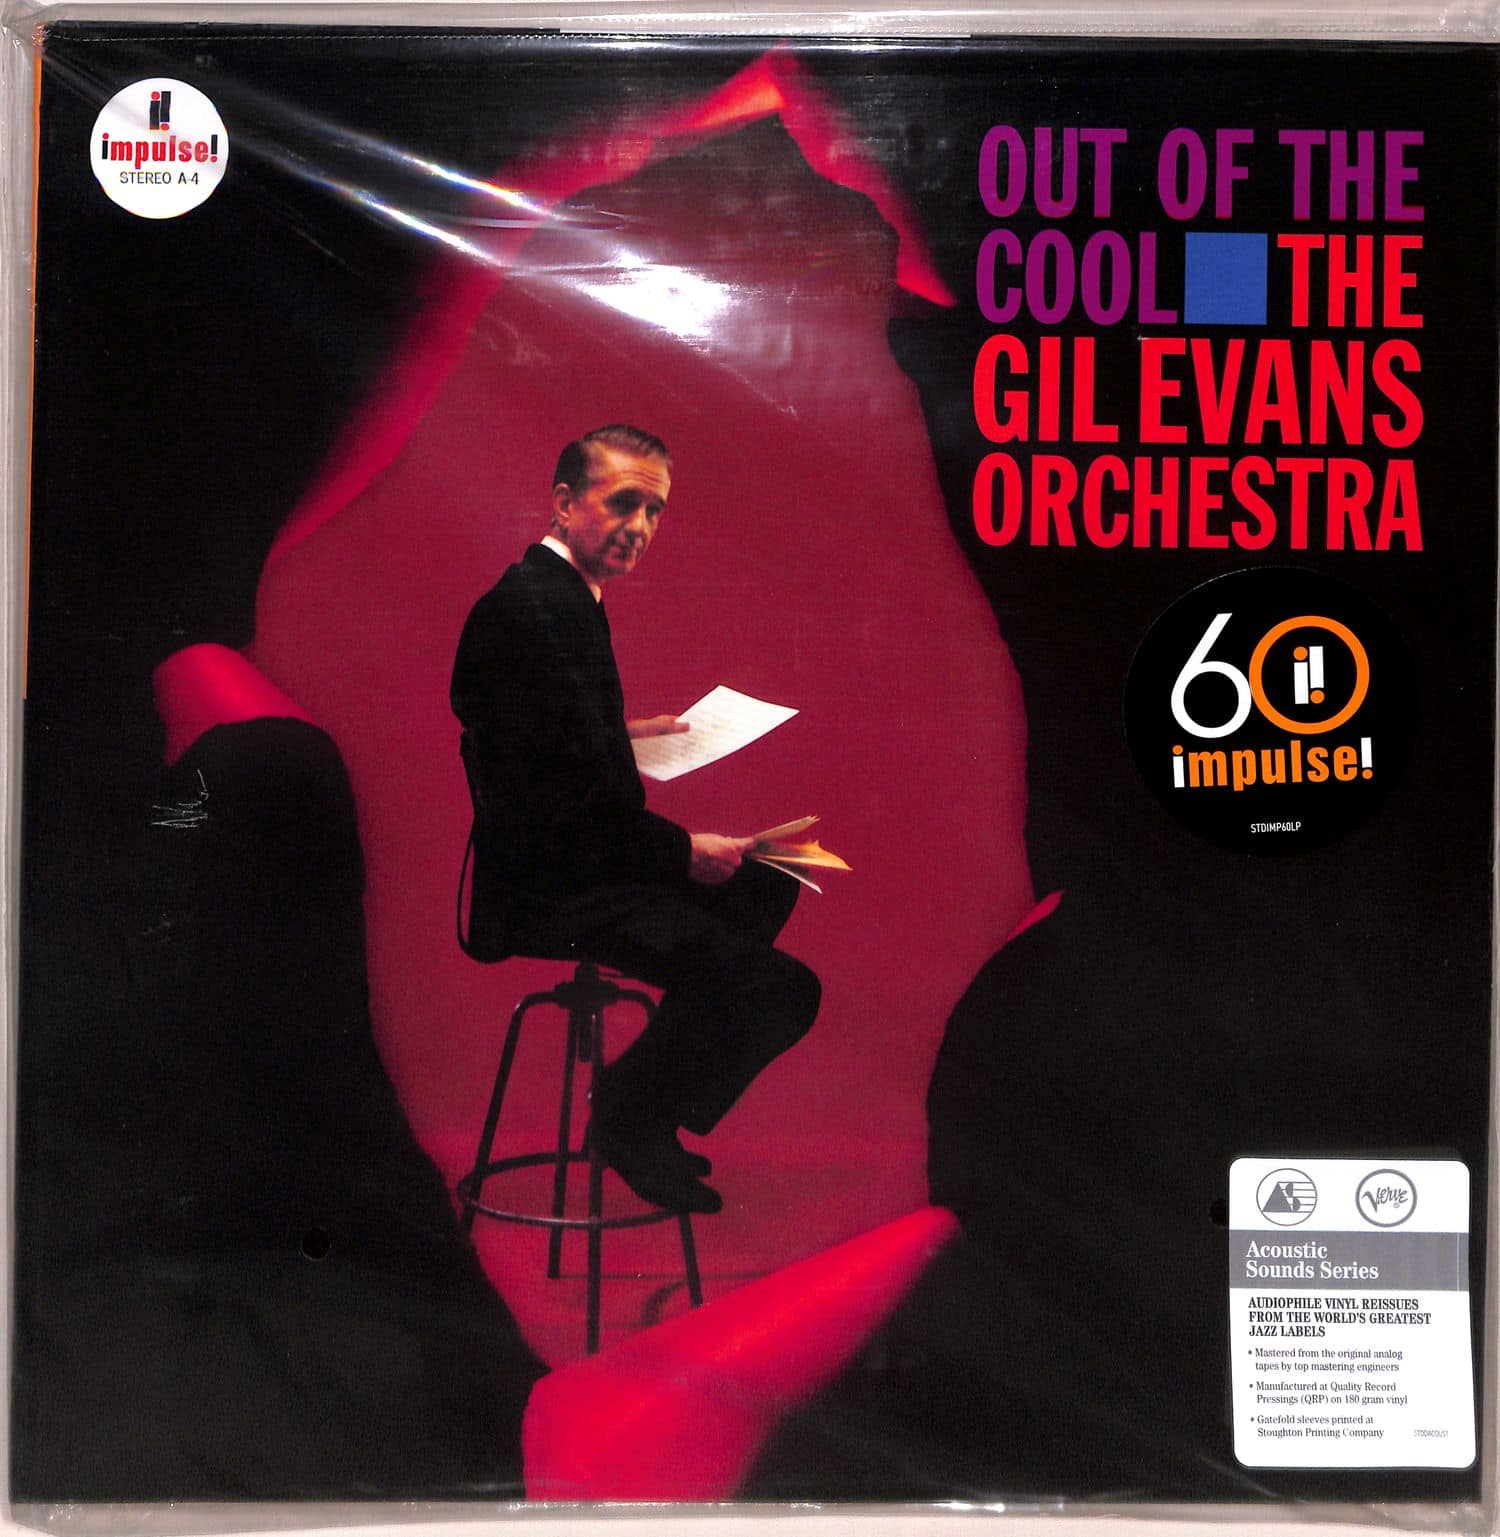 The Gil Evans Orchestra - OUT OF THE COOL 